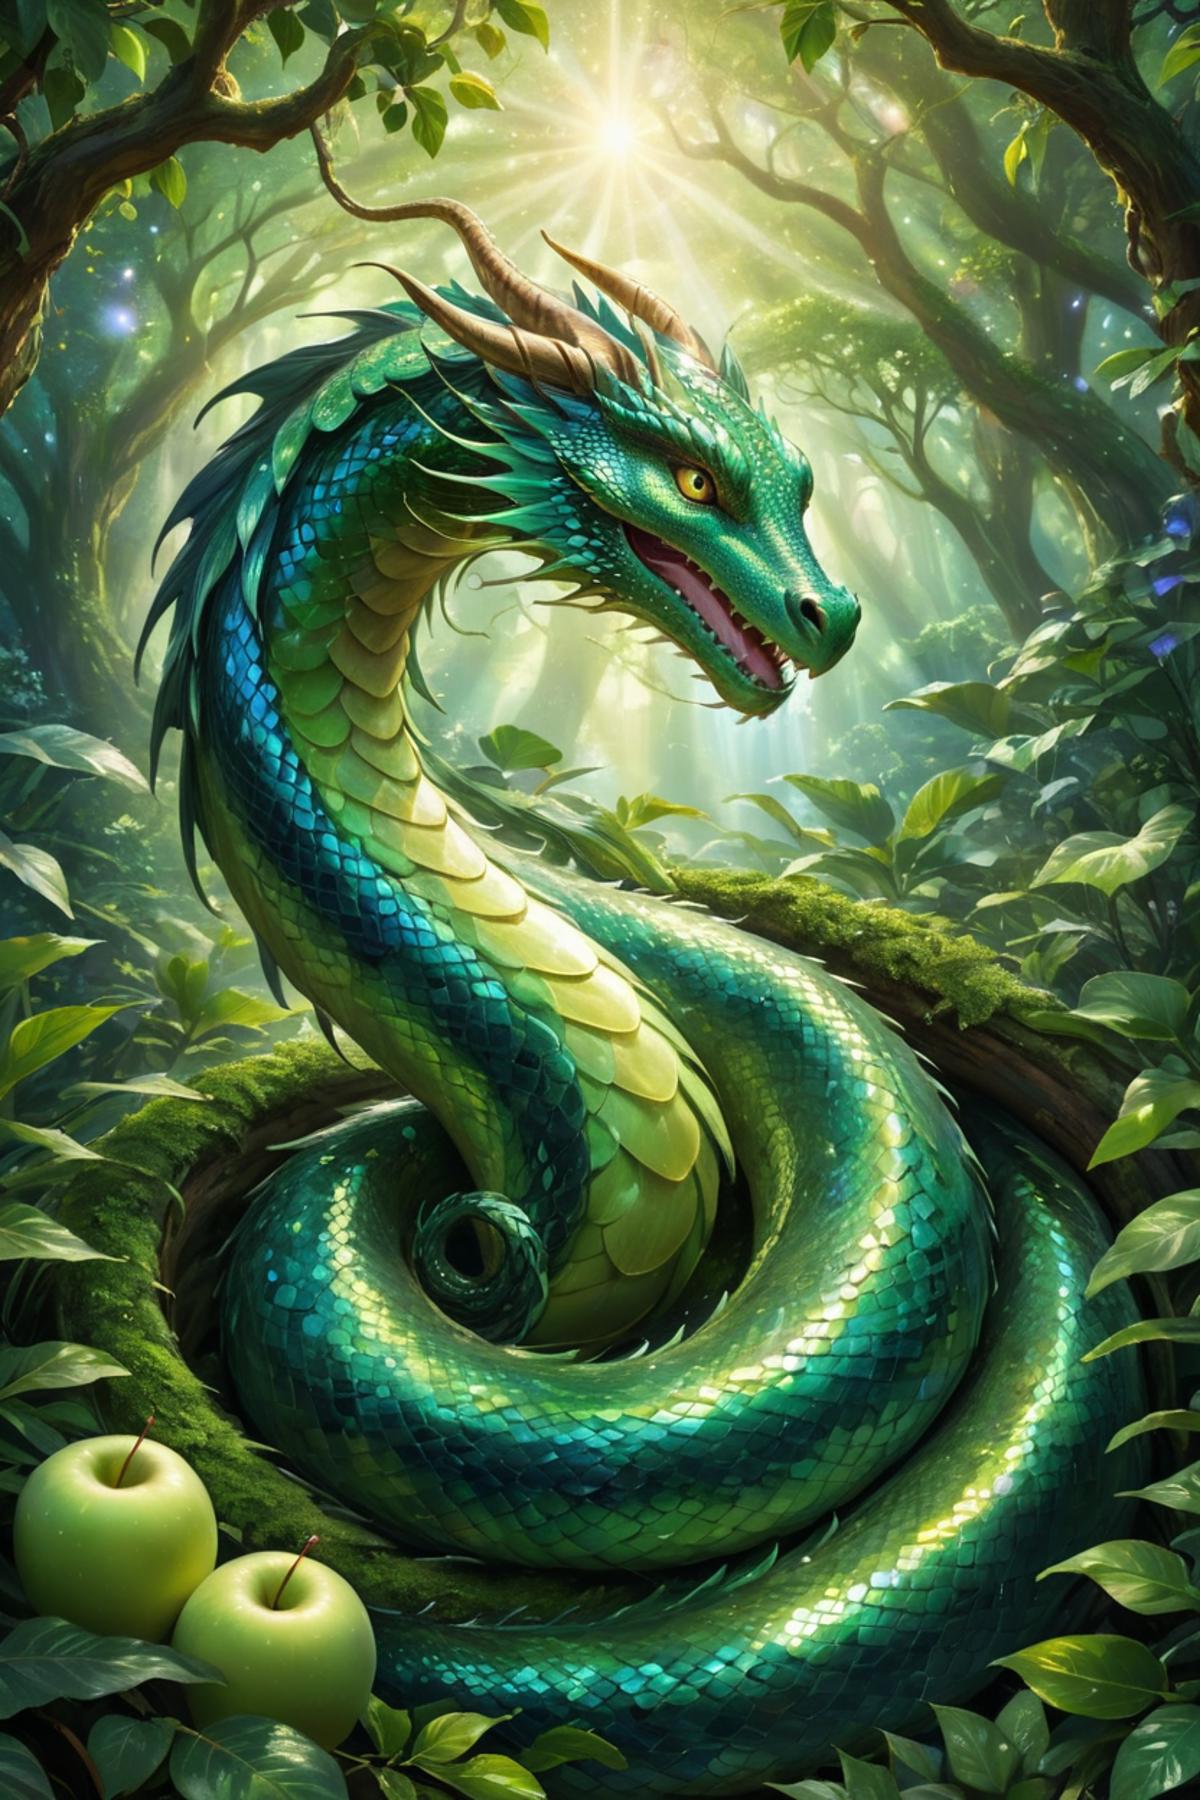 A blue dragon with a green apple in its mouth, surrounded by green plants and trees.